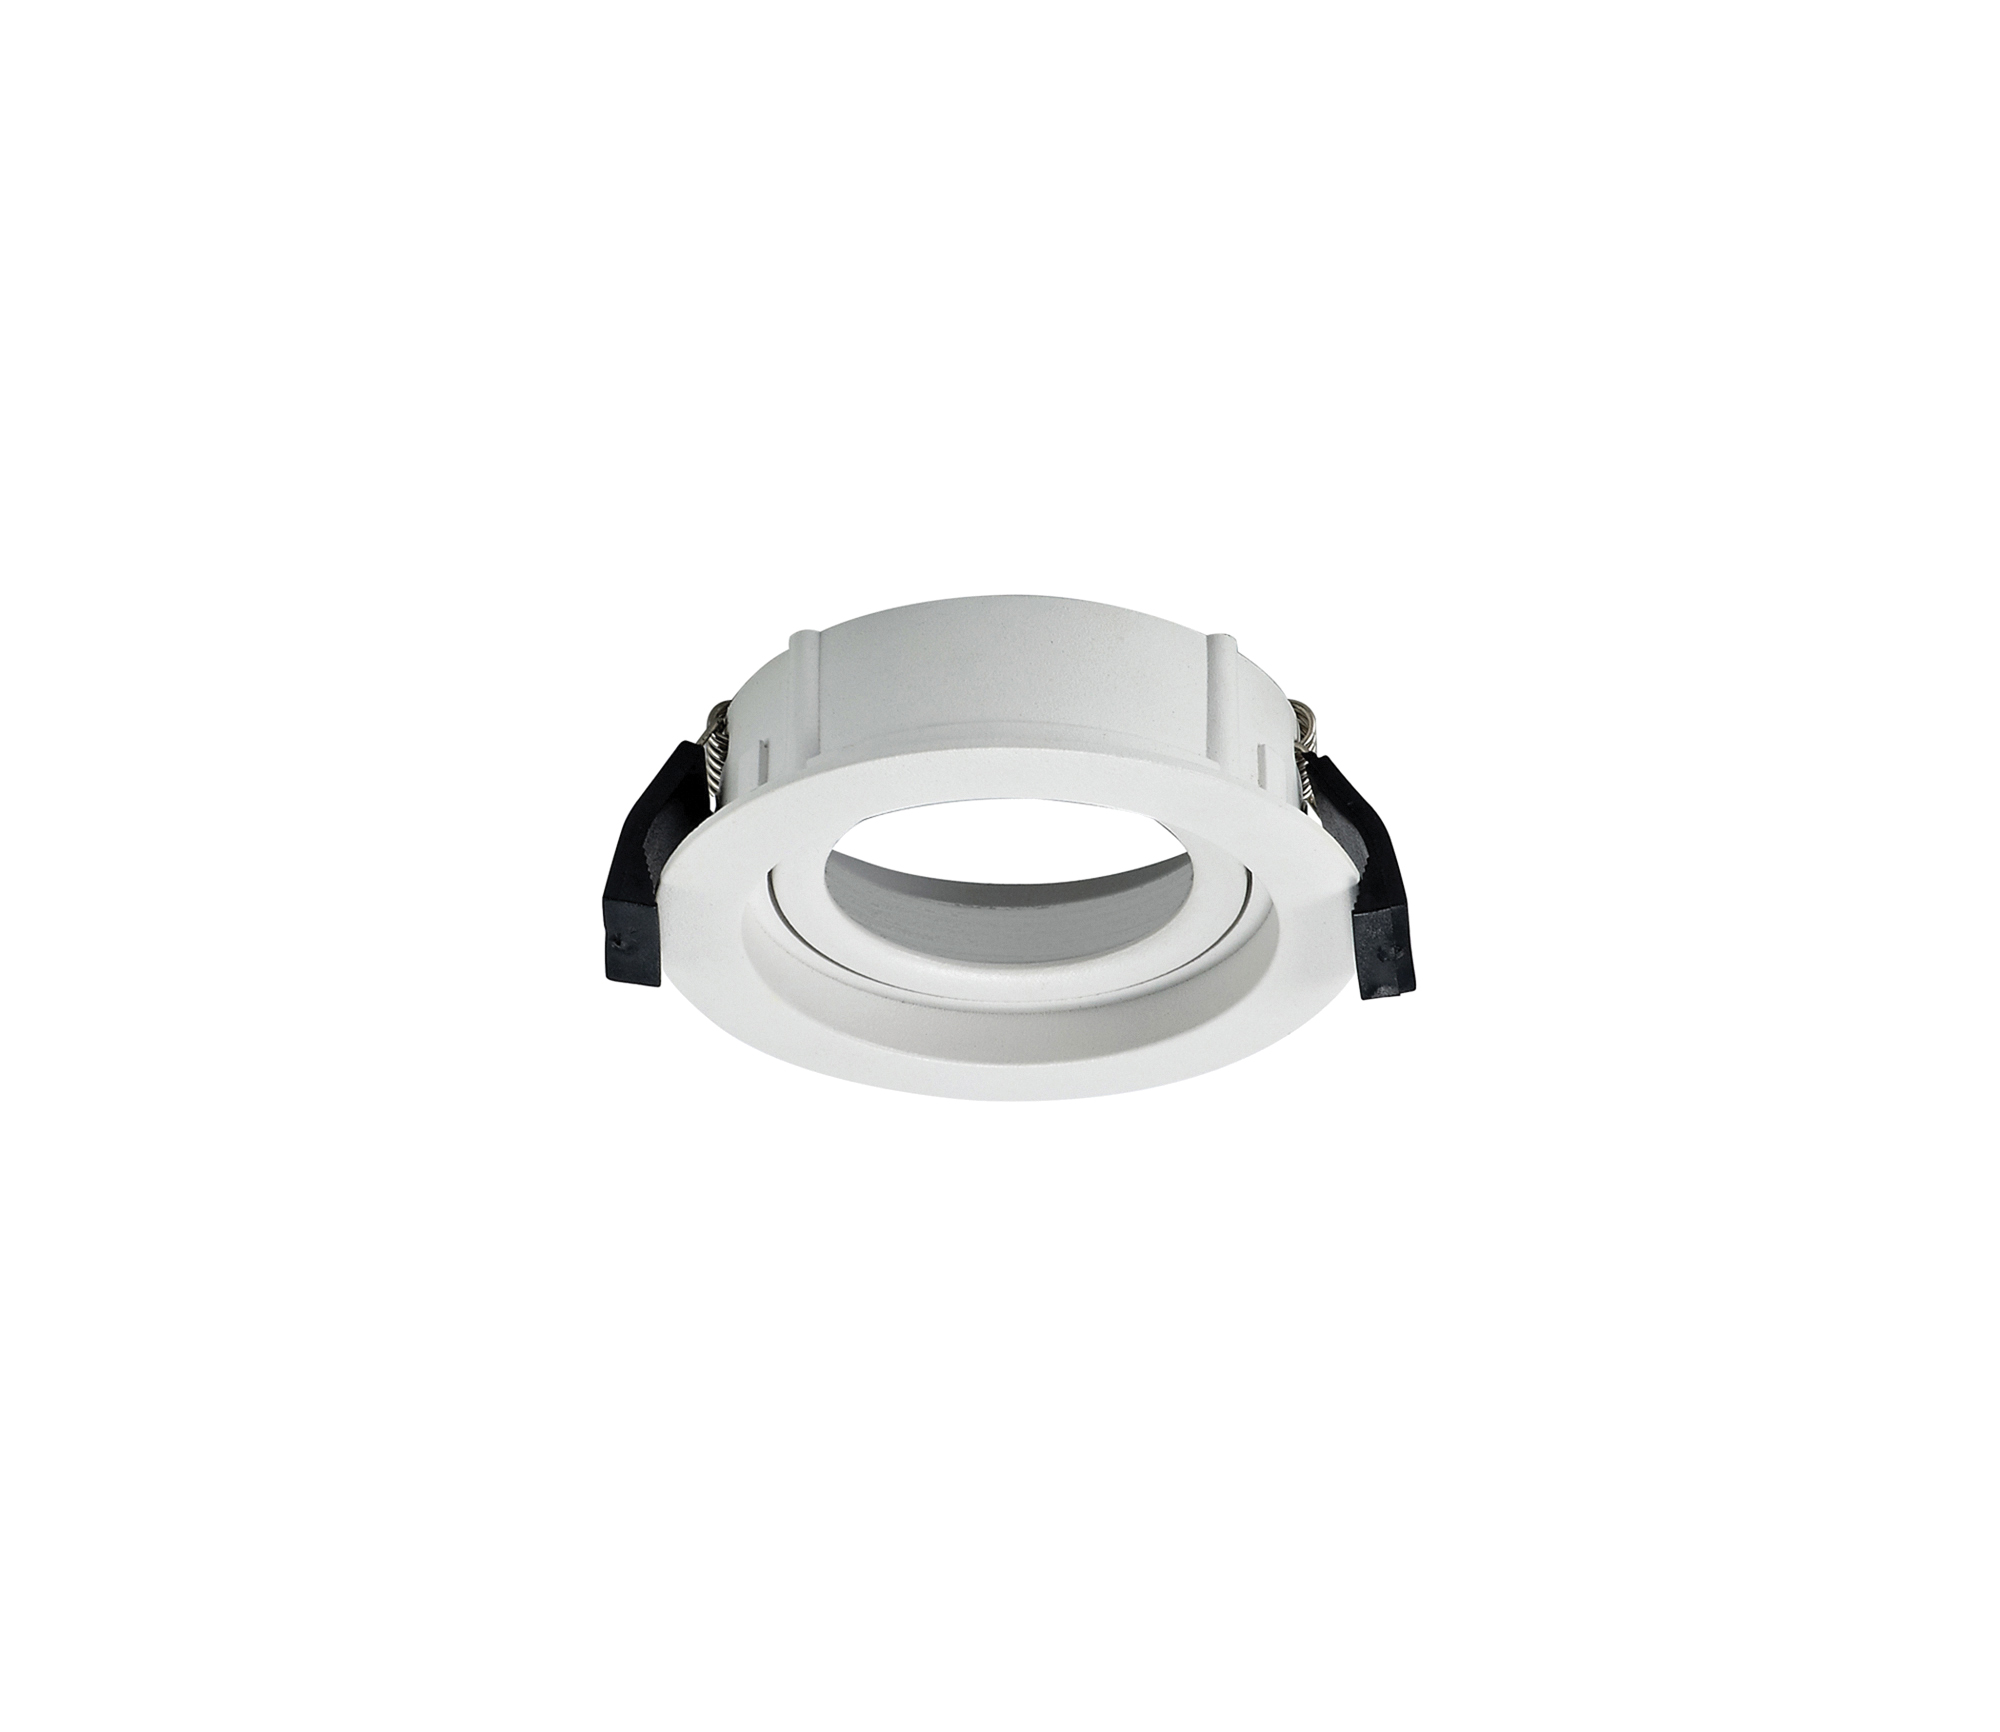 DX200370  Beppe; White Stepped Adjustable Recessed Spotlight Frame - LED ENGINE REQUIRED; Dia: 85mm; Cut Out: 76mm; 3yrs Warranty